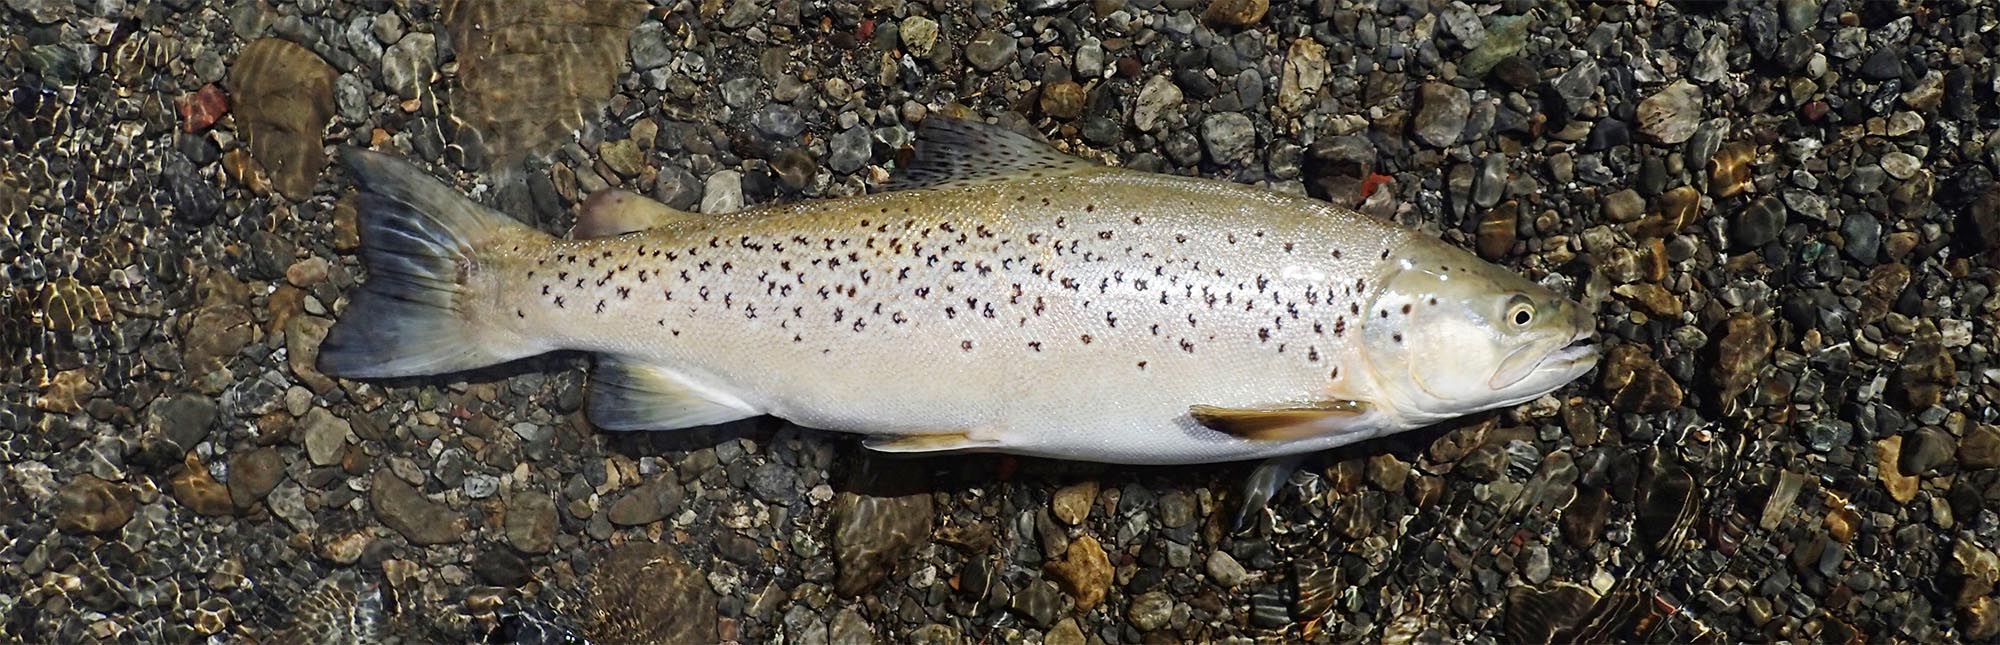 A healthy sea-run brown trout lying in pebbly shallows of a river, before being relased